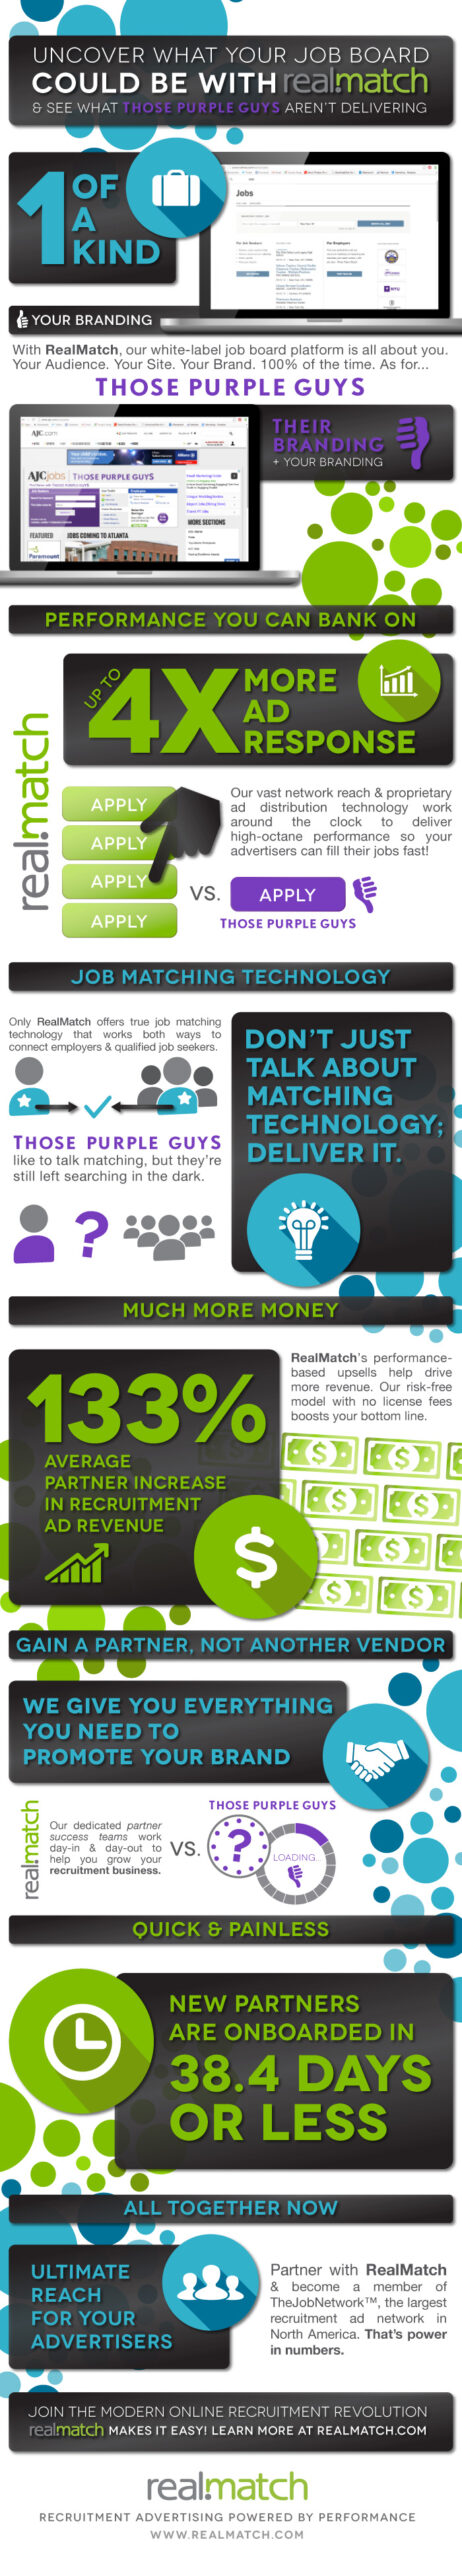 Uncover What Your Job Board Could Be With RealMatch [INFOGRAPHIC]